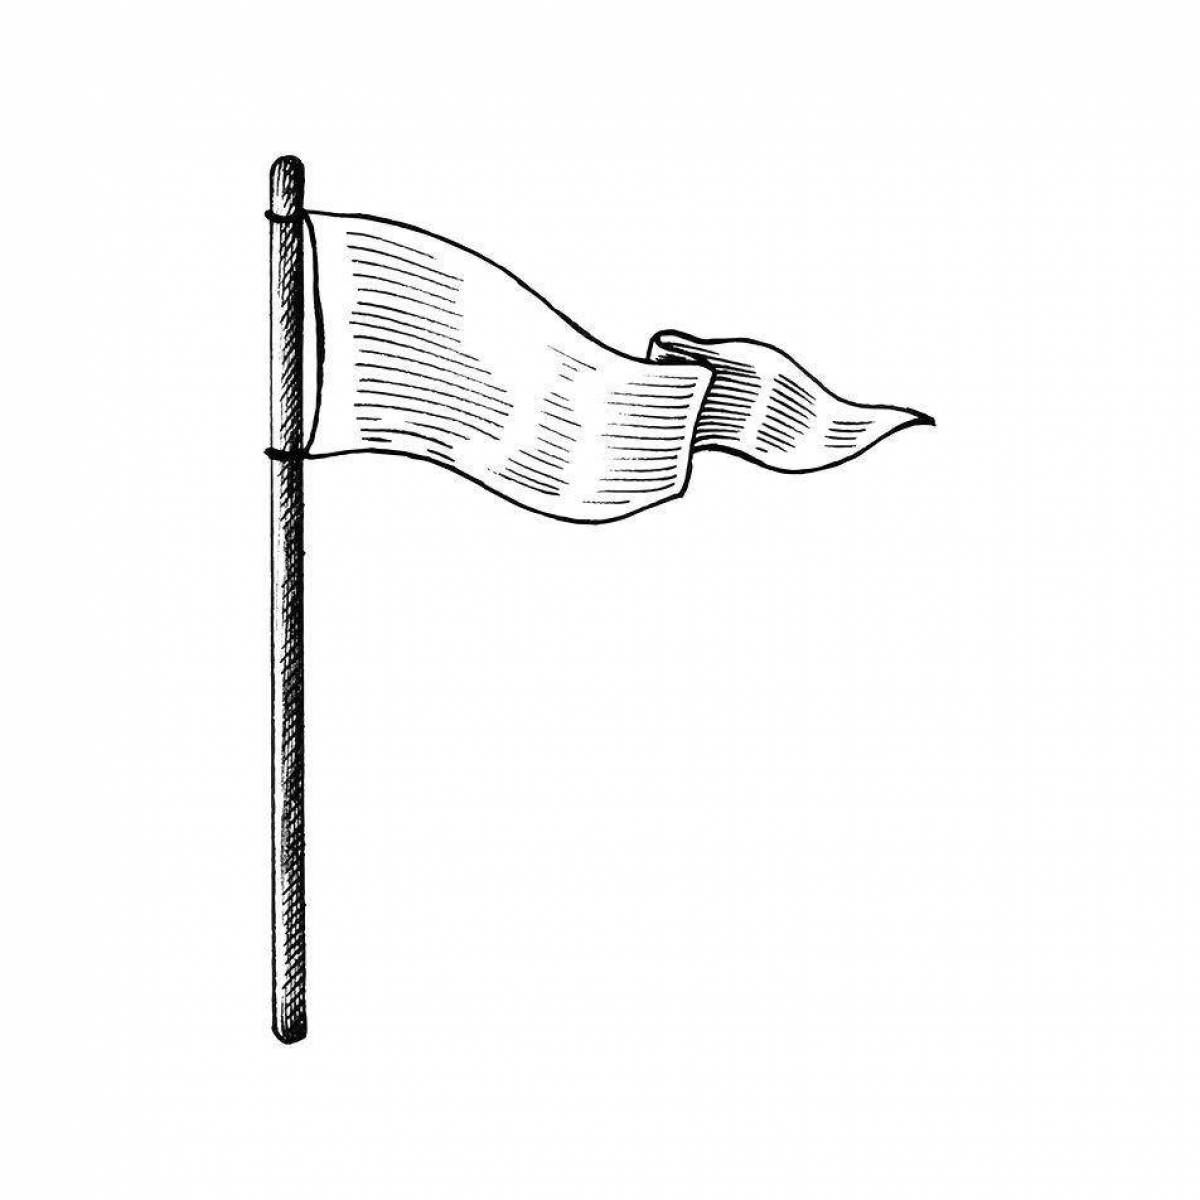 Children's flag coloring book